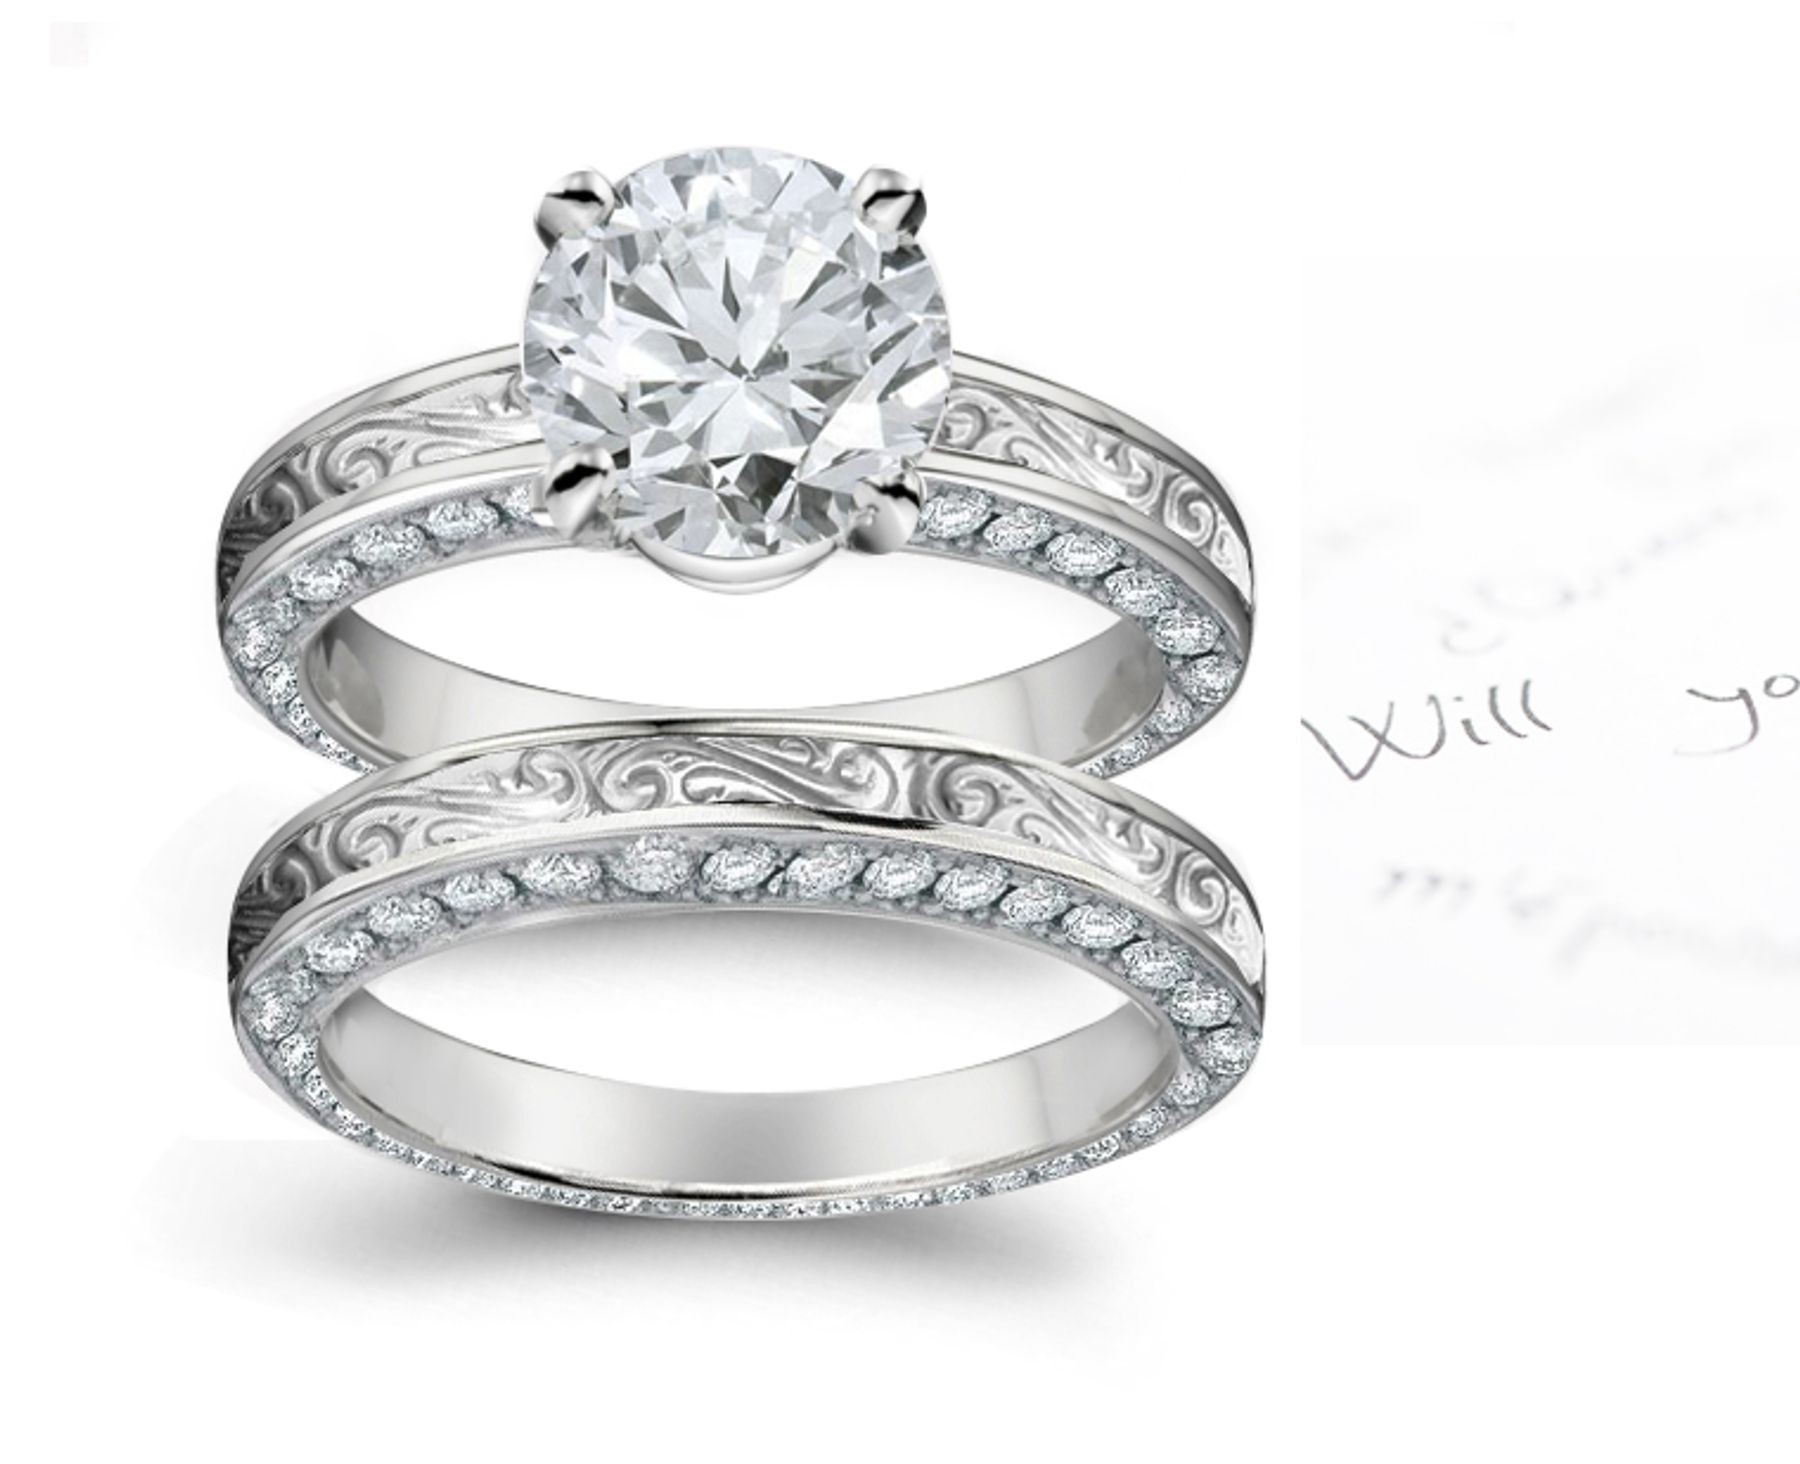 Special Design Platinum, & Diamond Ring with Floral Scrolls & Motifs Shoulders & Diamond Halo Sides